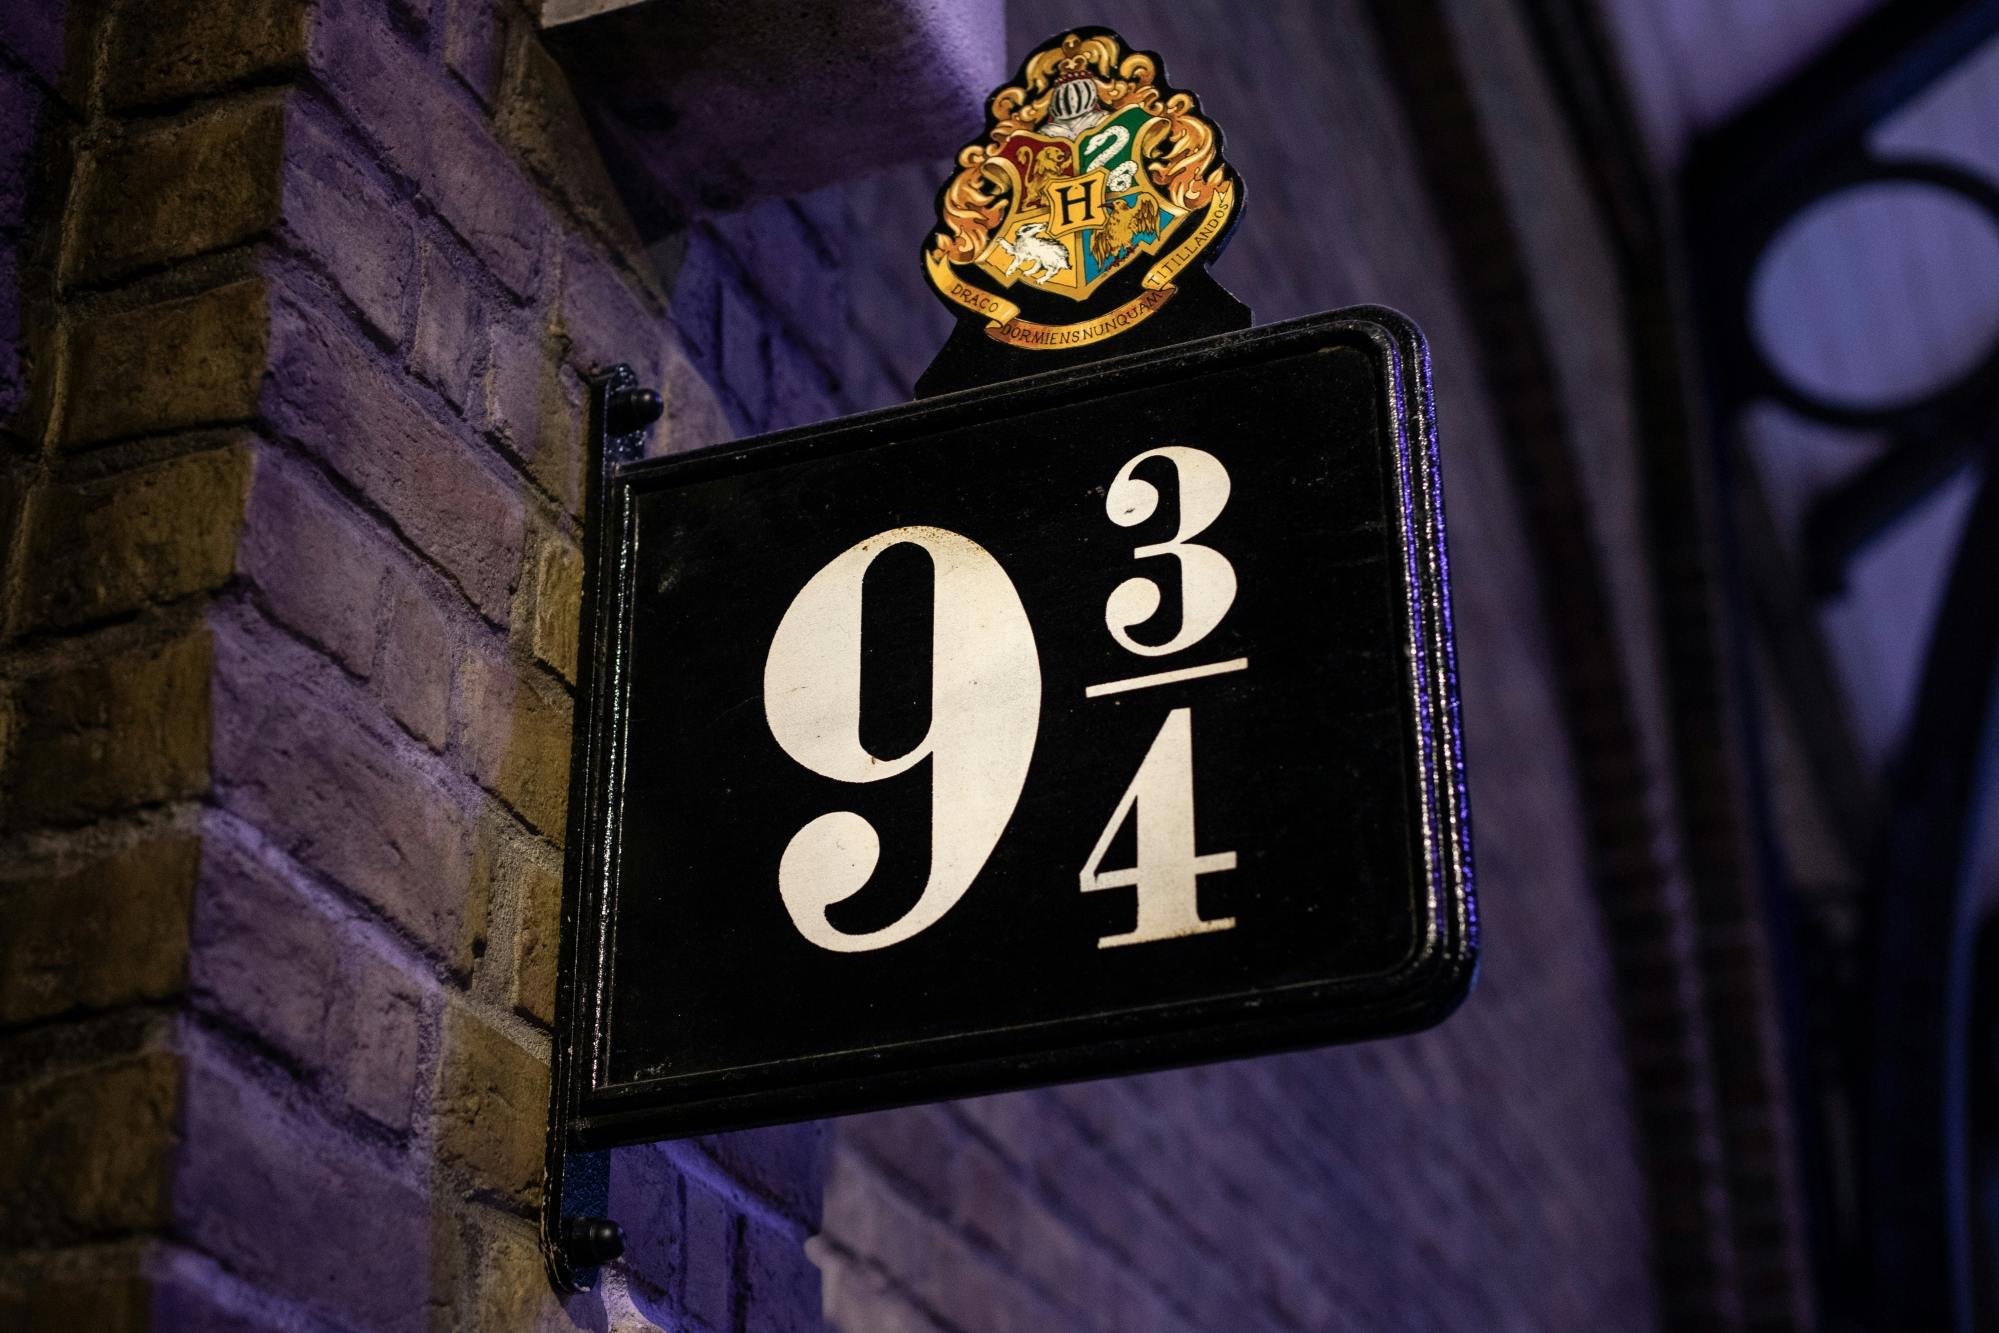 Warner Bros. Studio Tour London - The Making of Harry Potter Tickets mit Transfer